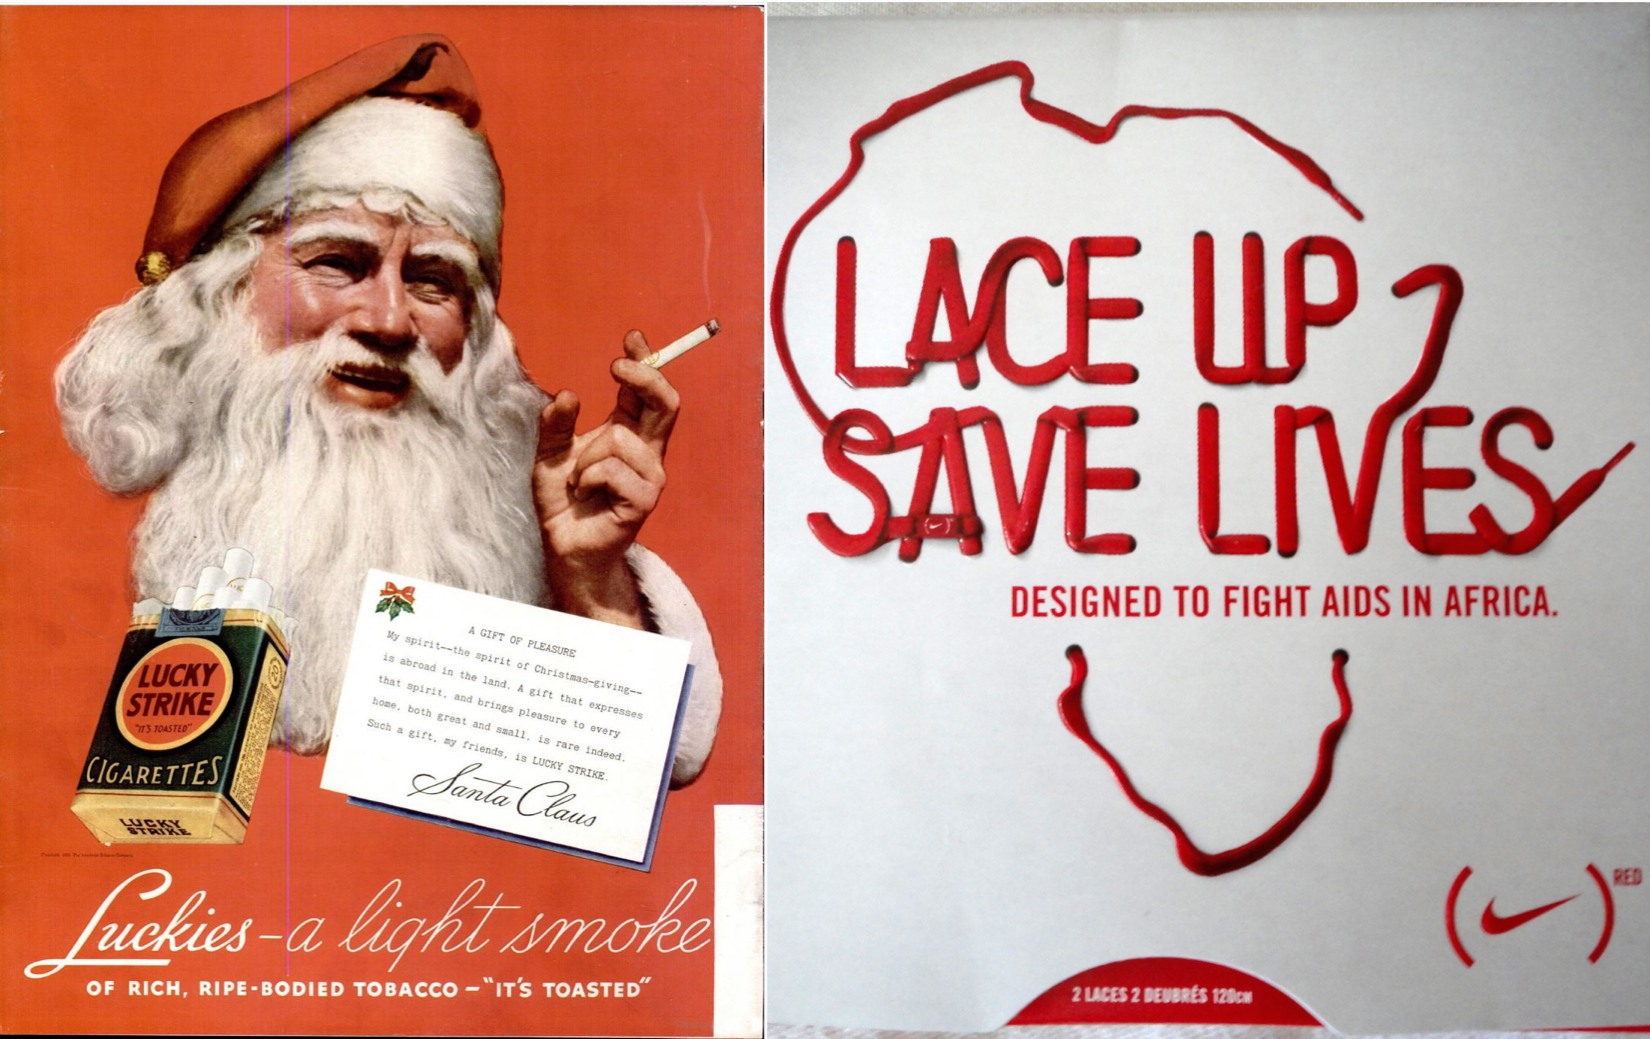 Left: A smiling Santa Claus smokes a cigarette. A card reads, A Gift of Pleasure: My spirit, the Spirit of Christmas-giving, is abroad in the land. A gift that expresses that spirit, and brings pleasure to every home, both great and small, is rare indeed. Such a gift, my friends, is LUCKY STRIKE. Santa Claus. Below Santa are the words Luckies, a light smoke of rich, ripe-bodied tobacco. It's toasted. Right: Some bright red shoelaces are laced through a white background to form a loose silhouette of Africa and the words Lace up Save lives. A caption reads Designed to fight AIDS in Africa. The Nike logo with the superscript RED is in the bottom corner.